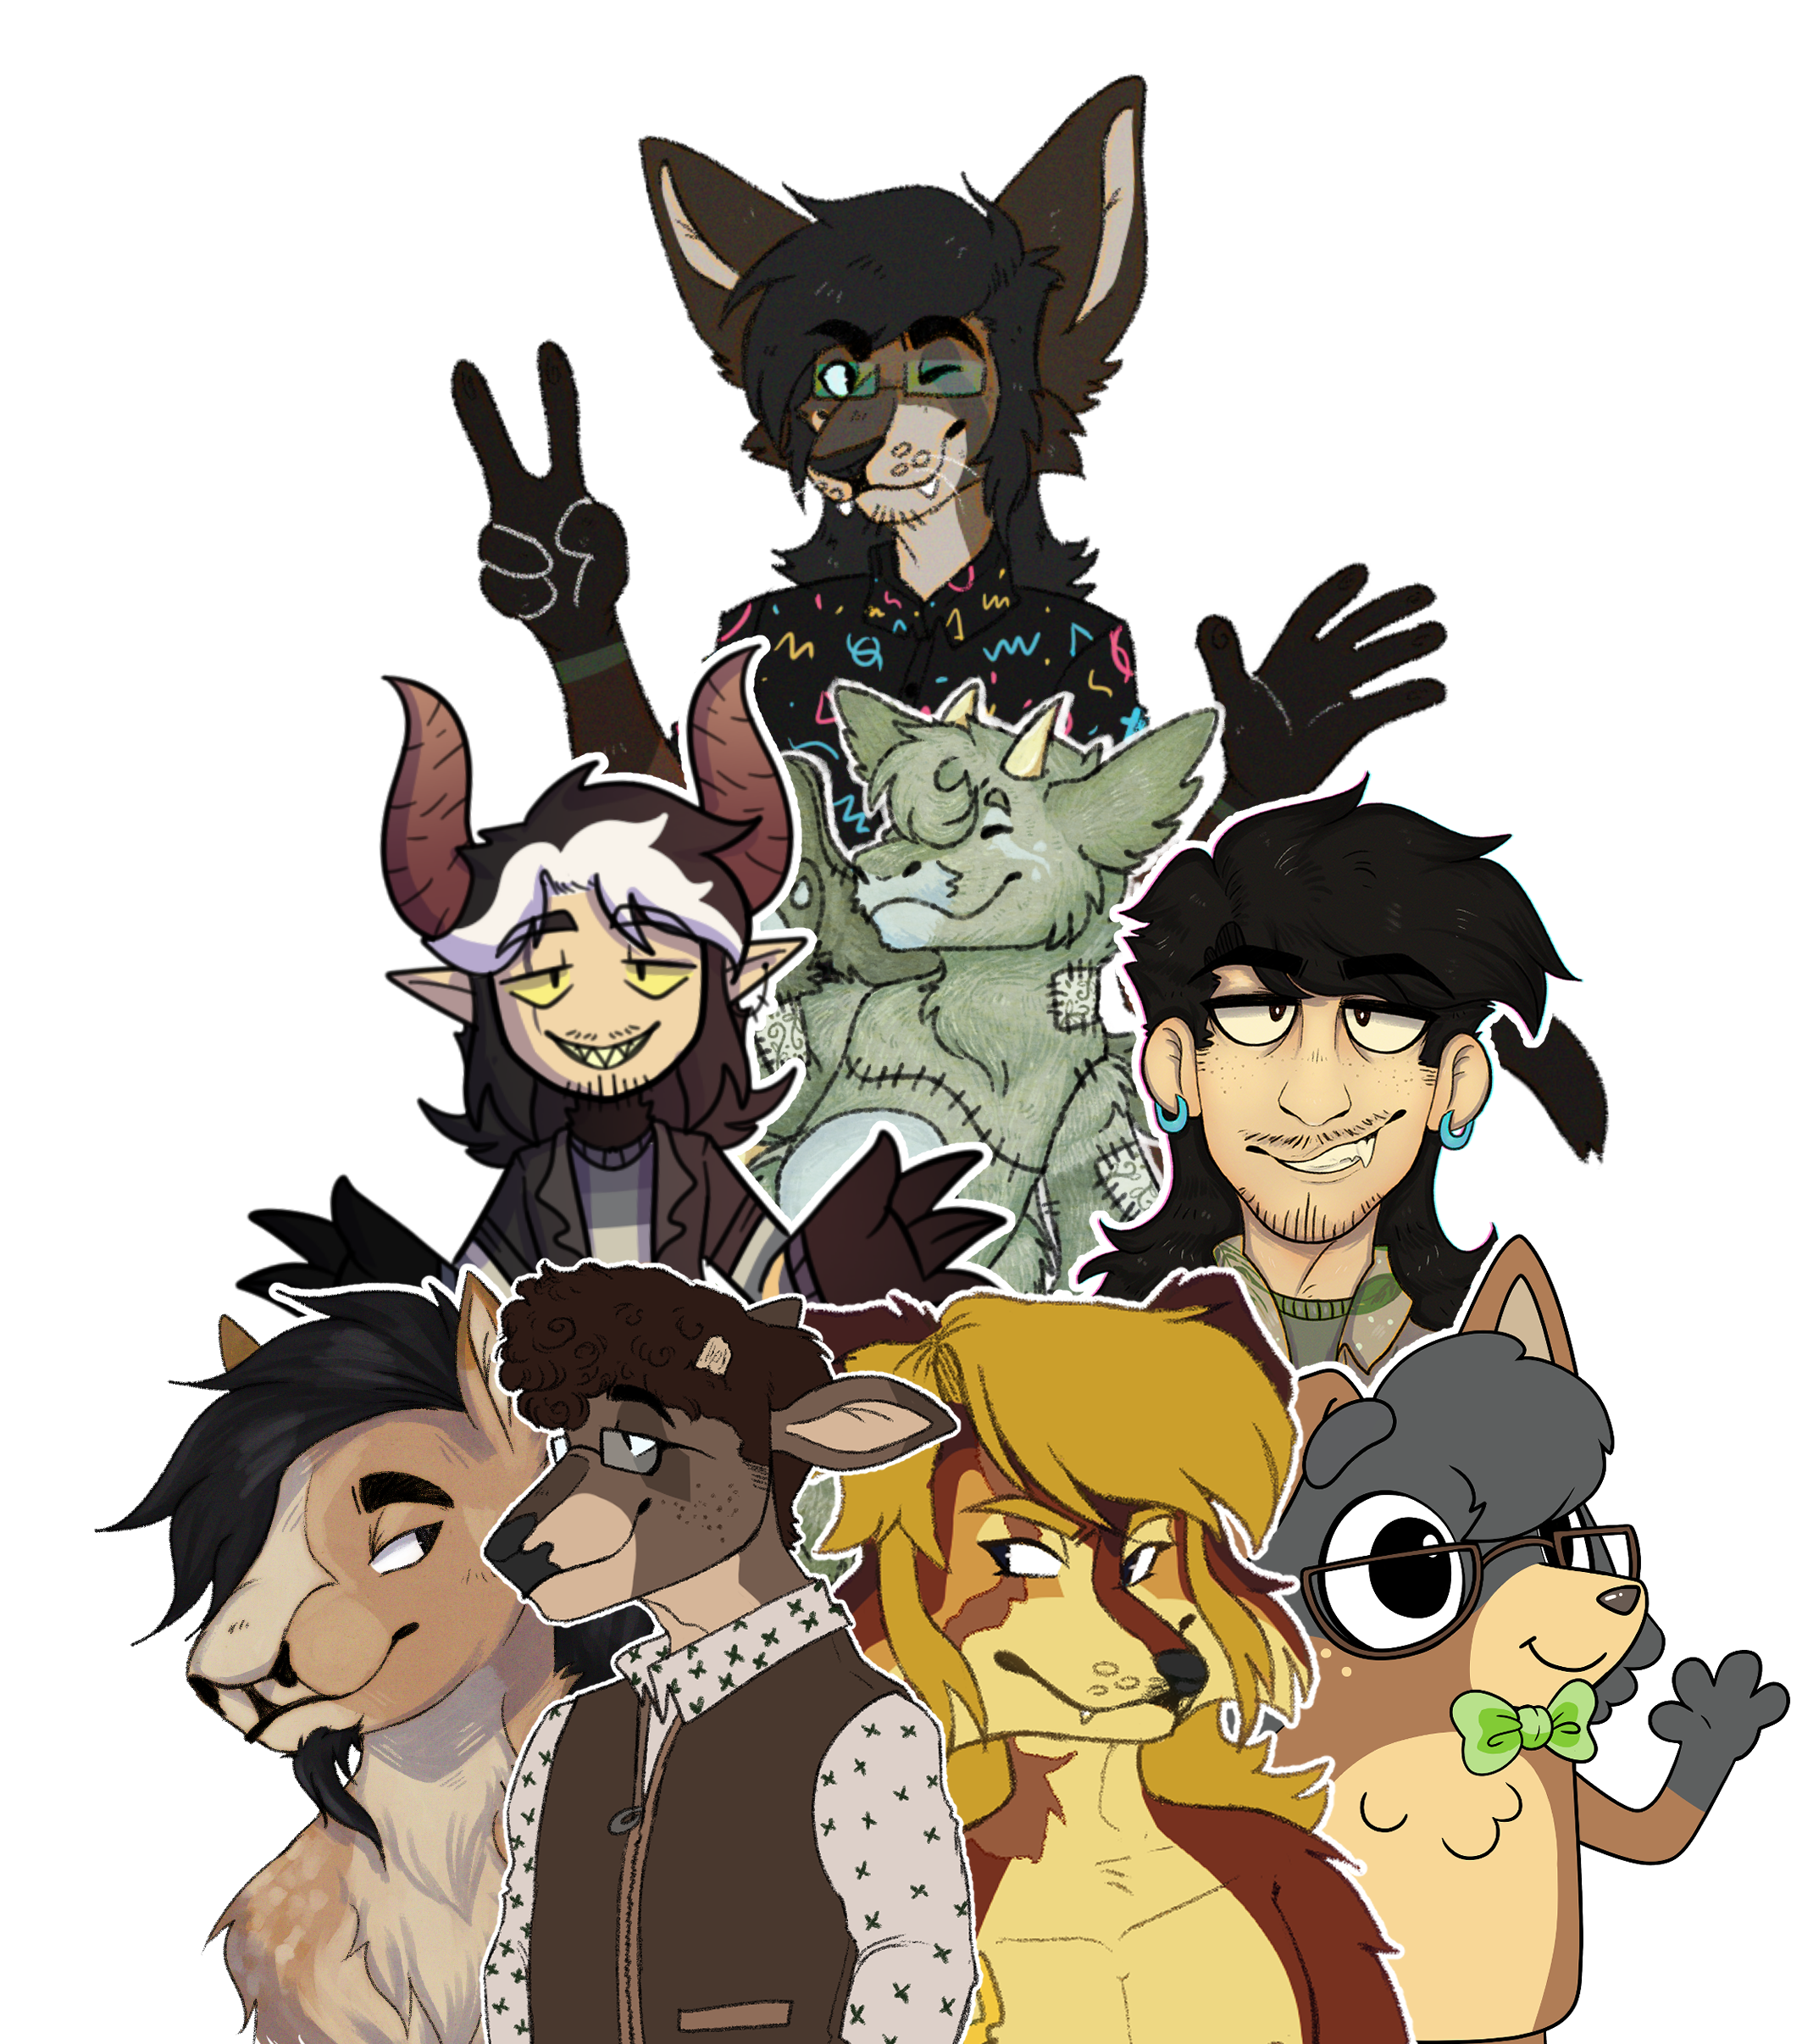 A collage of 4 different bust drawings featuring a cat in a button up, a person in a tan and green button up, a opossum in a hawaiian shirt and a demon with pointed ears